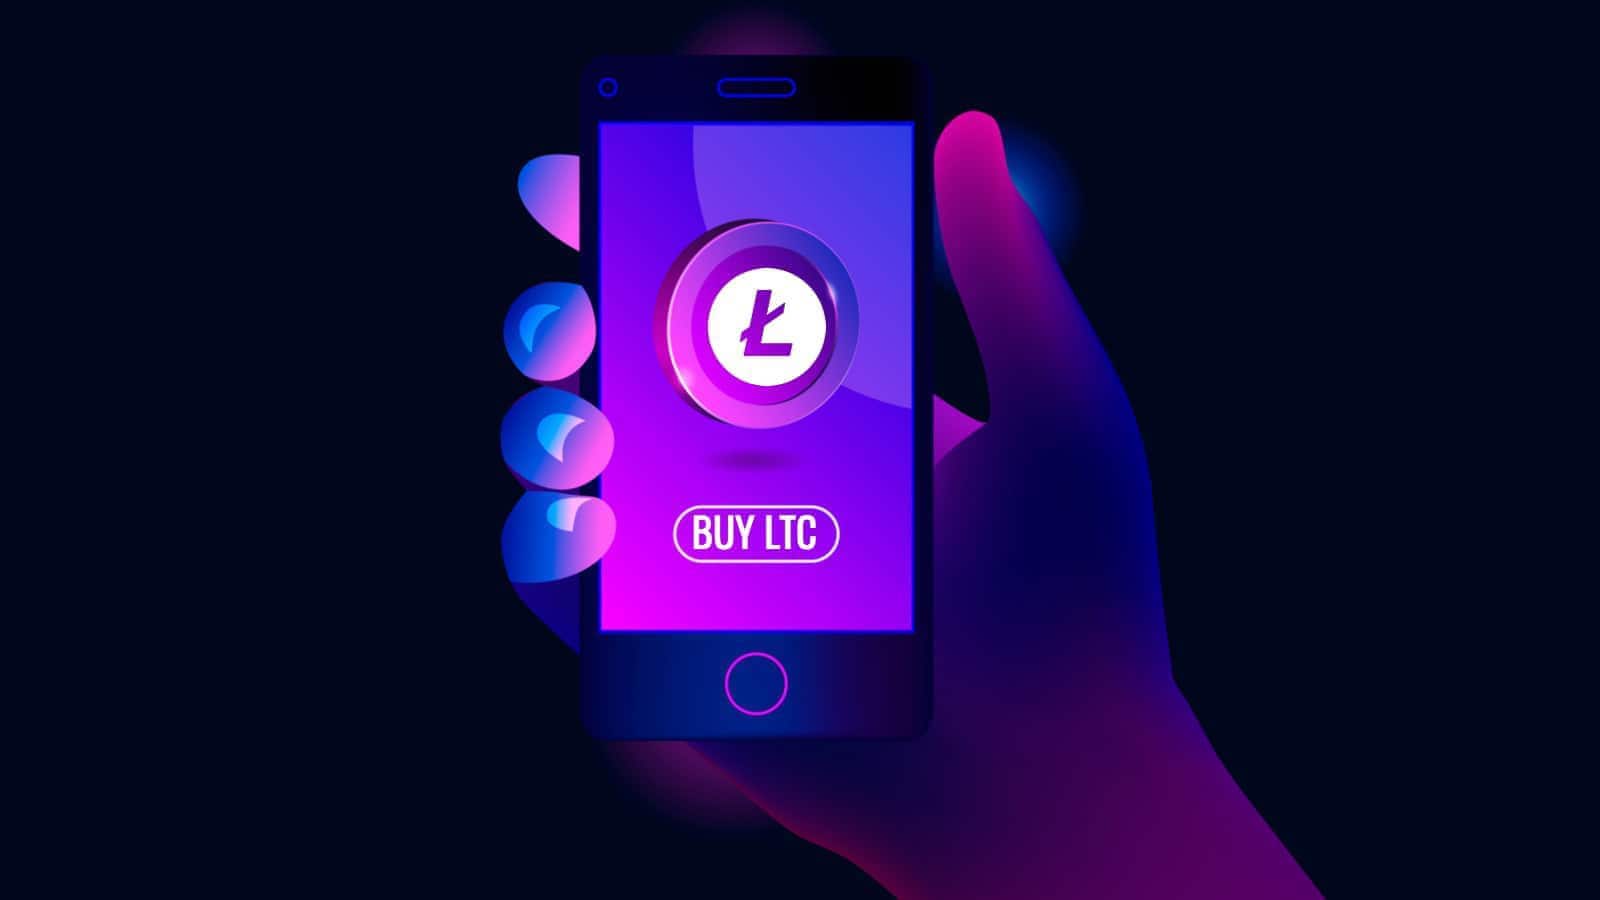 How To Buy Litecoin (LTC): A Step-By-Step Guide